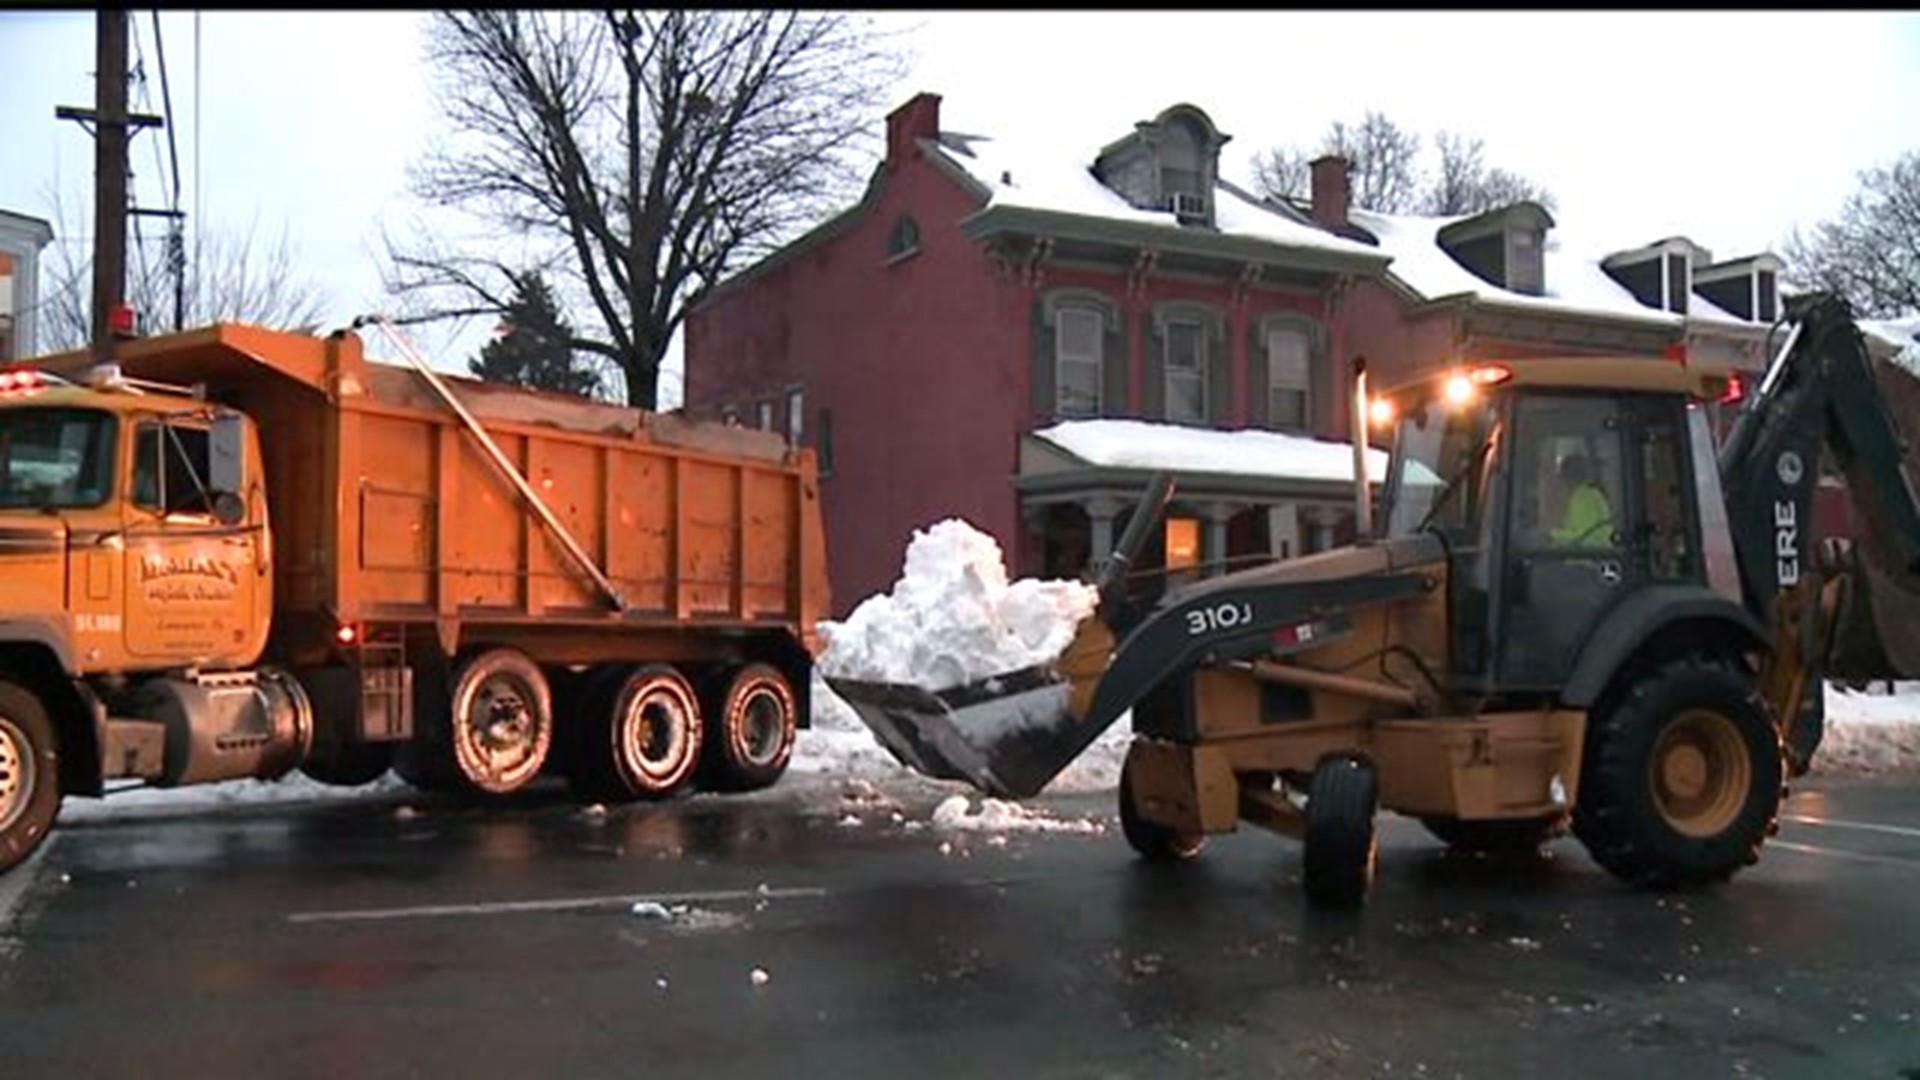 Lancaster snow removal slow, but steady